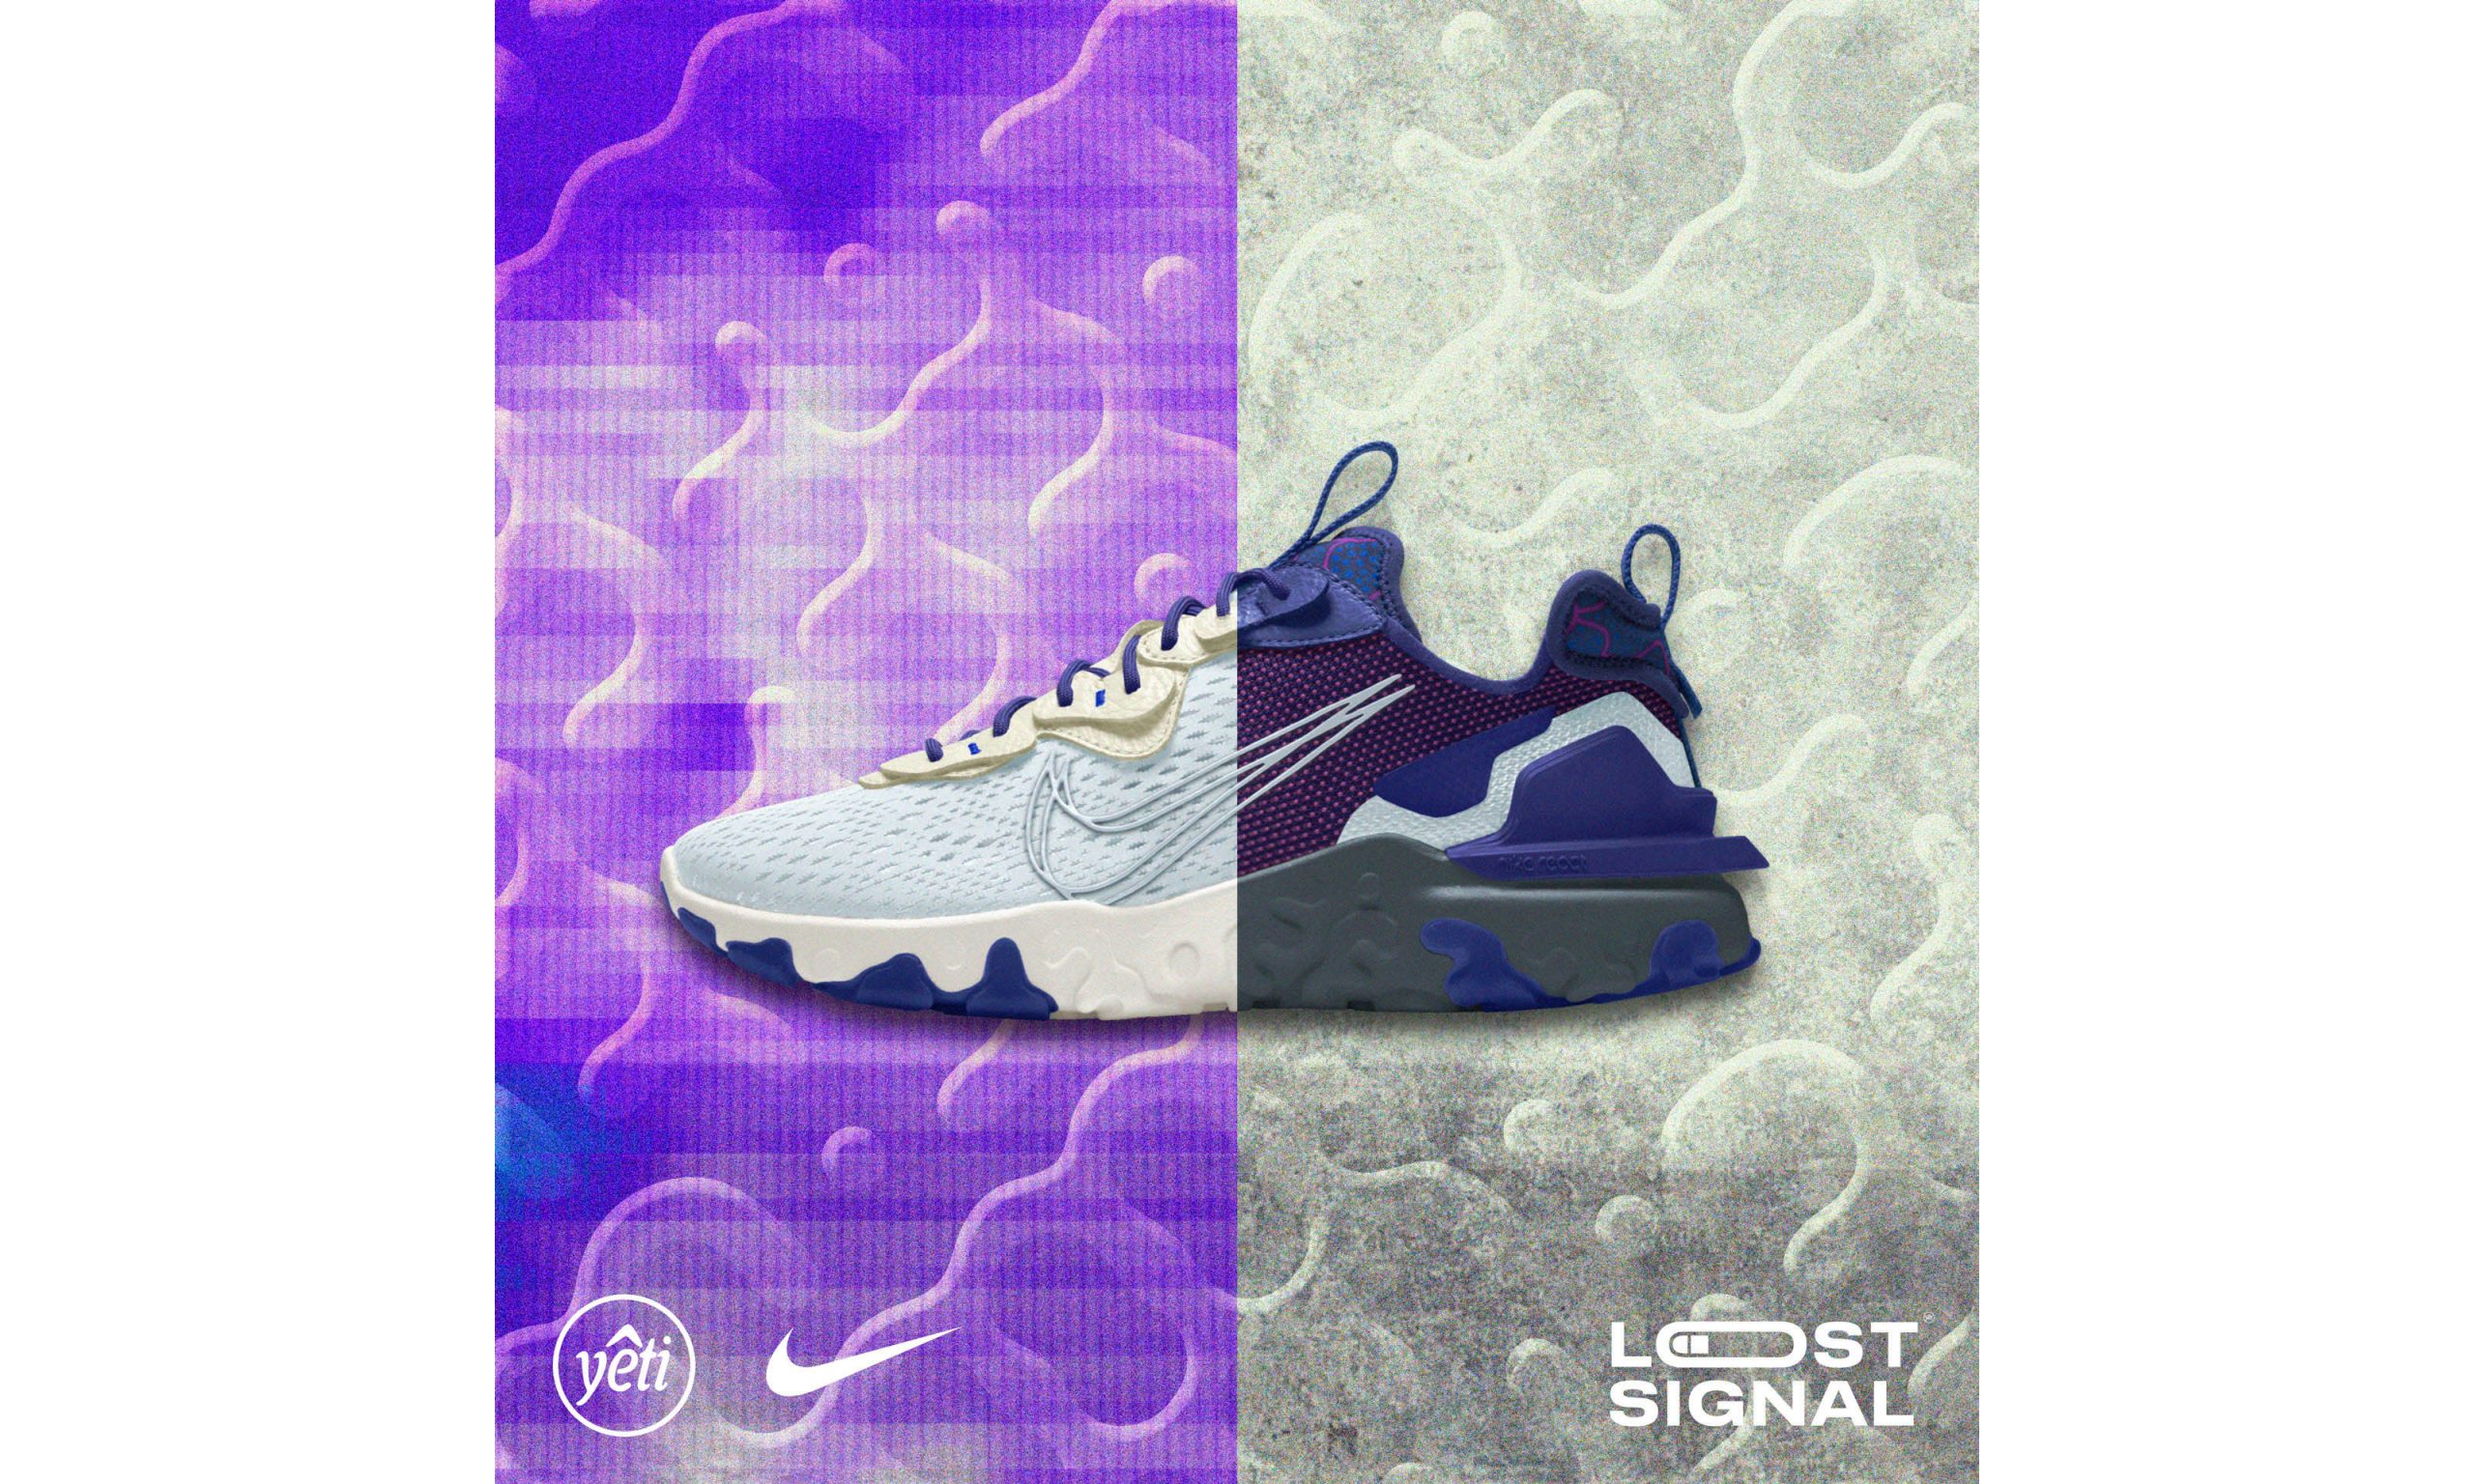 YETI OUT 联手 Nike By You 推出「LOST SIGNAL」React Vision 鞋履